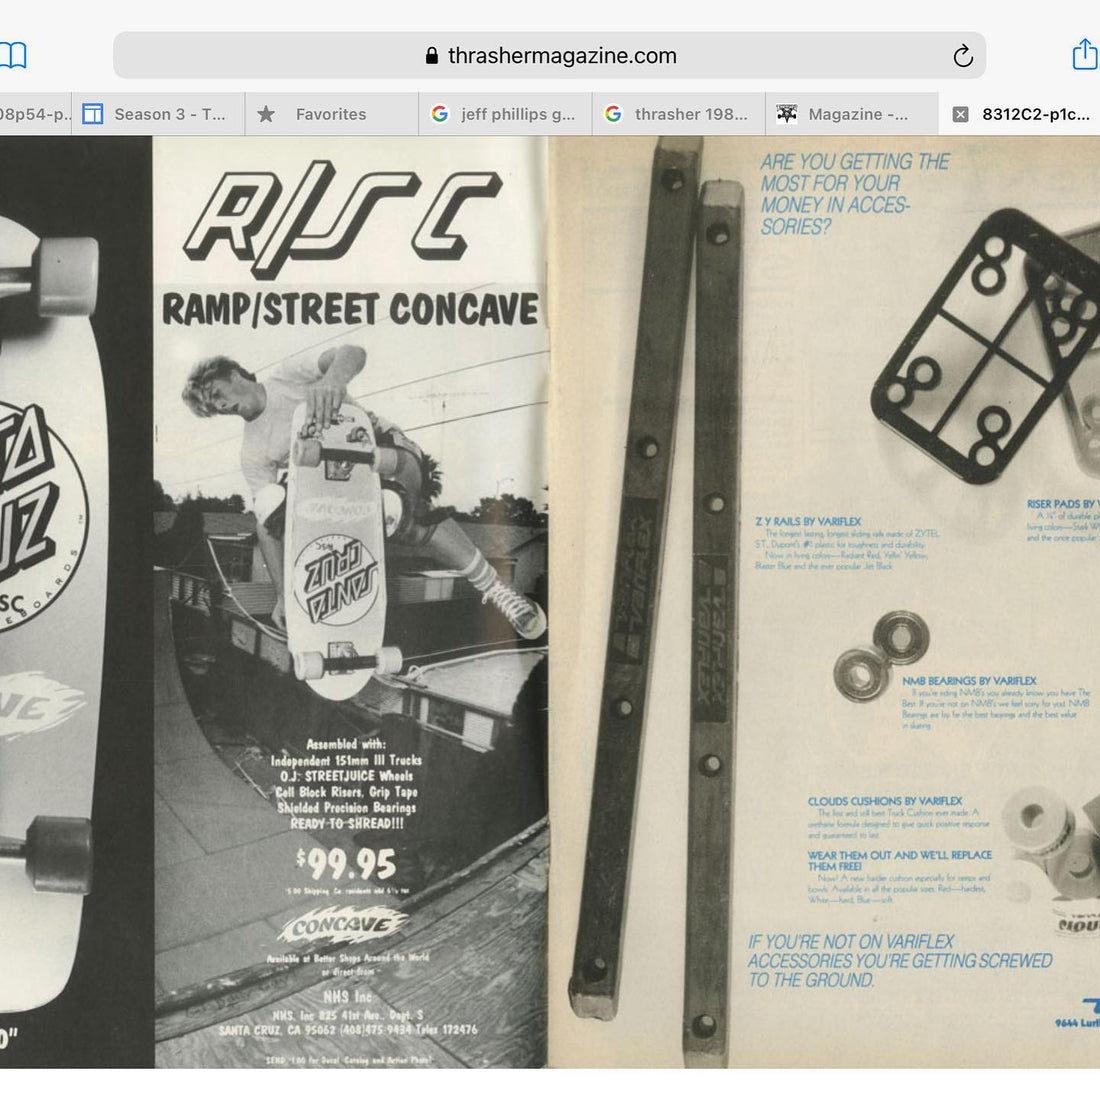 Skateboards 1983 
Thrasher archives
Research +...